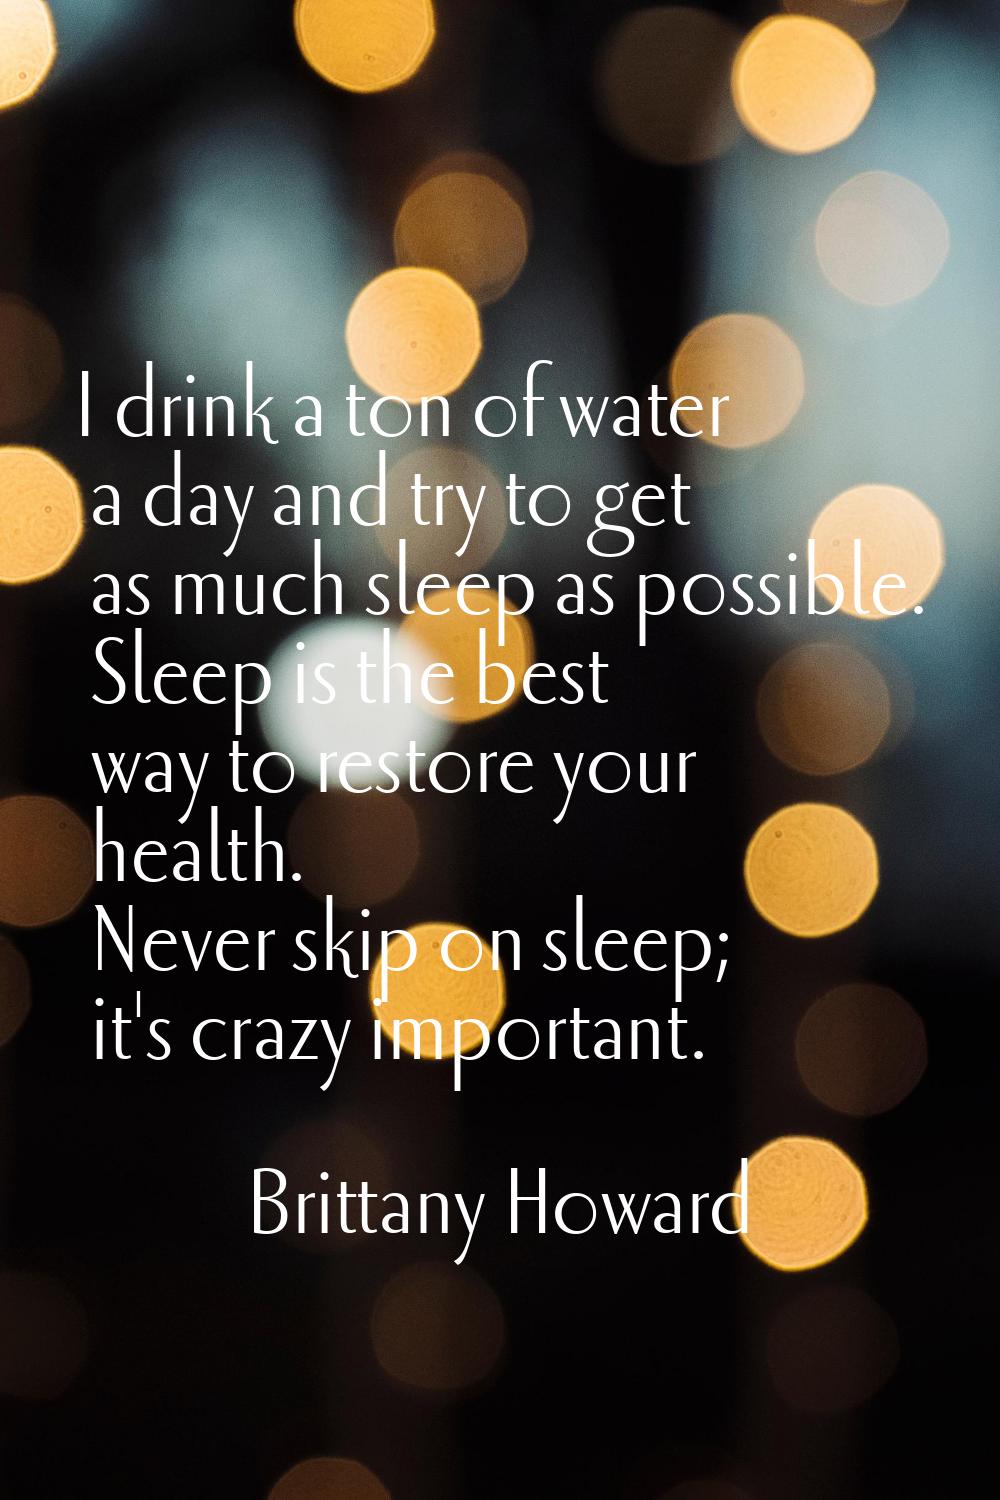 I drink a ton of water a day and try to get as much sleep as possible. Sleep is the best way to res